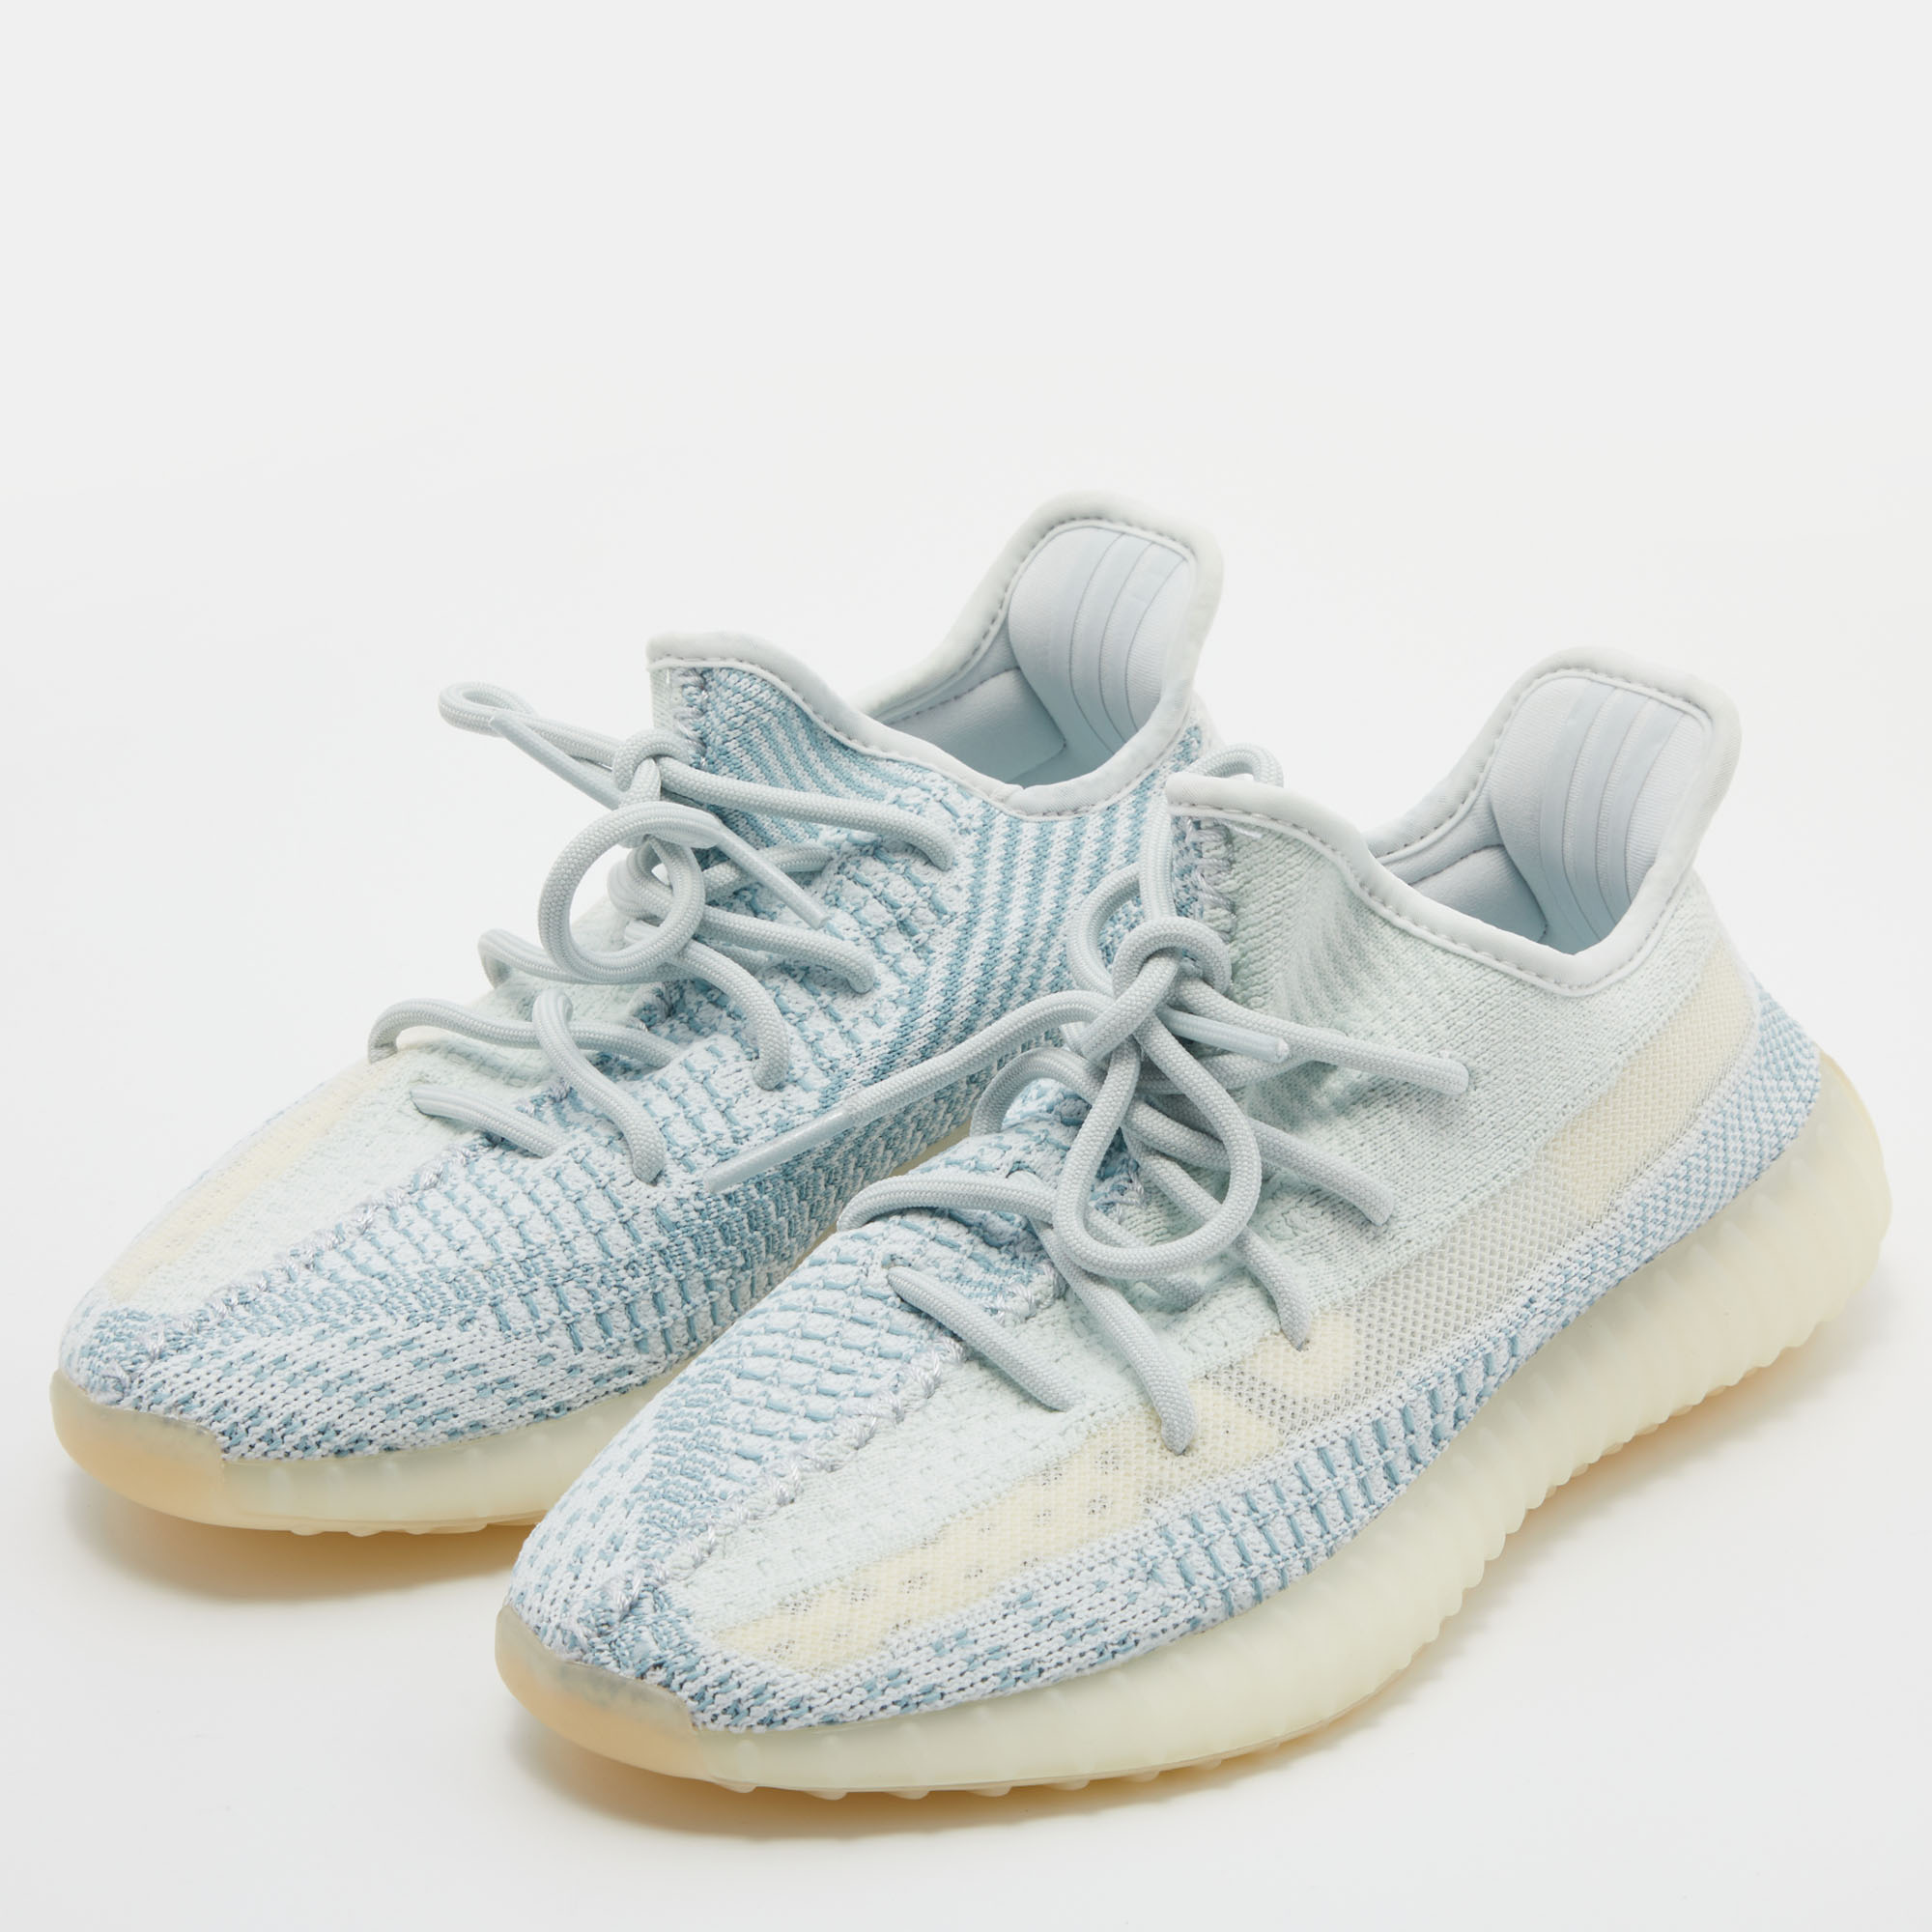 

Yeezy x Adidas Blue/White Knit Fabric Boost 350 V2 'Cloud White' Sneakers Size 39 1/3